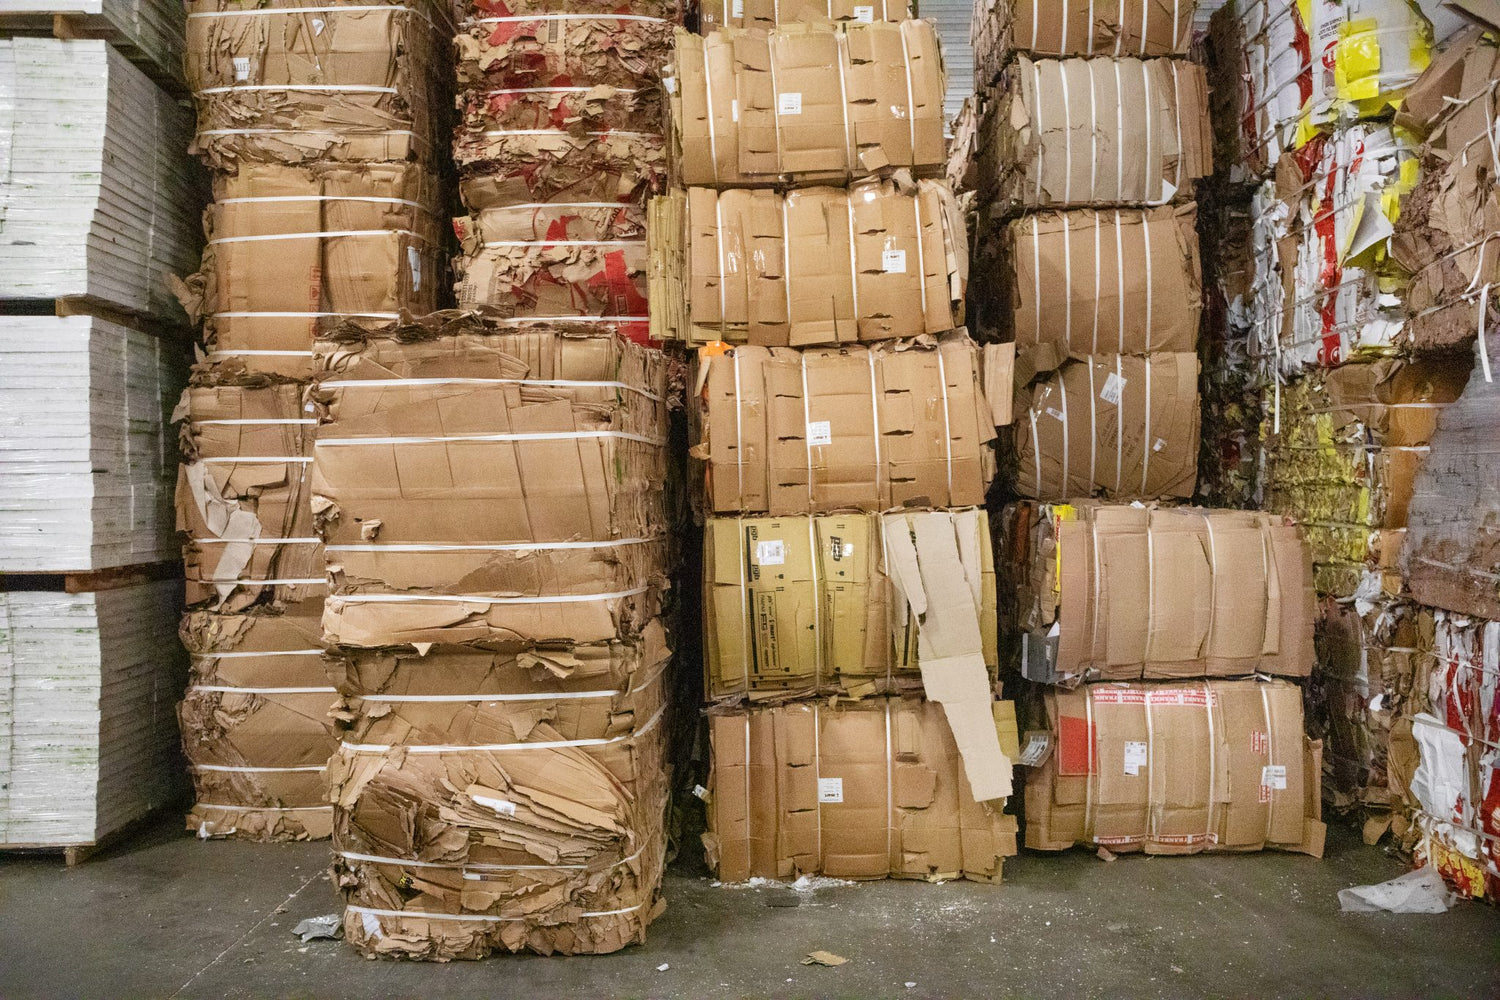 Bails of recycled cardboard, symbolizing teeone's dedication to using recycled packaging materials in our operations.